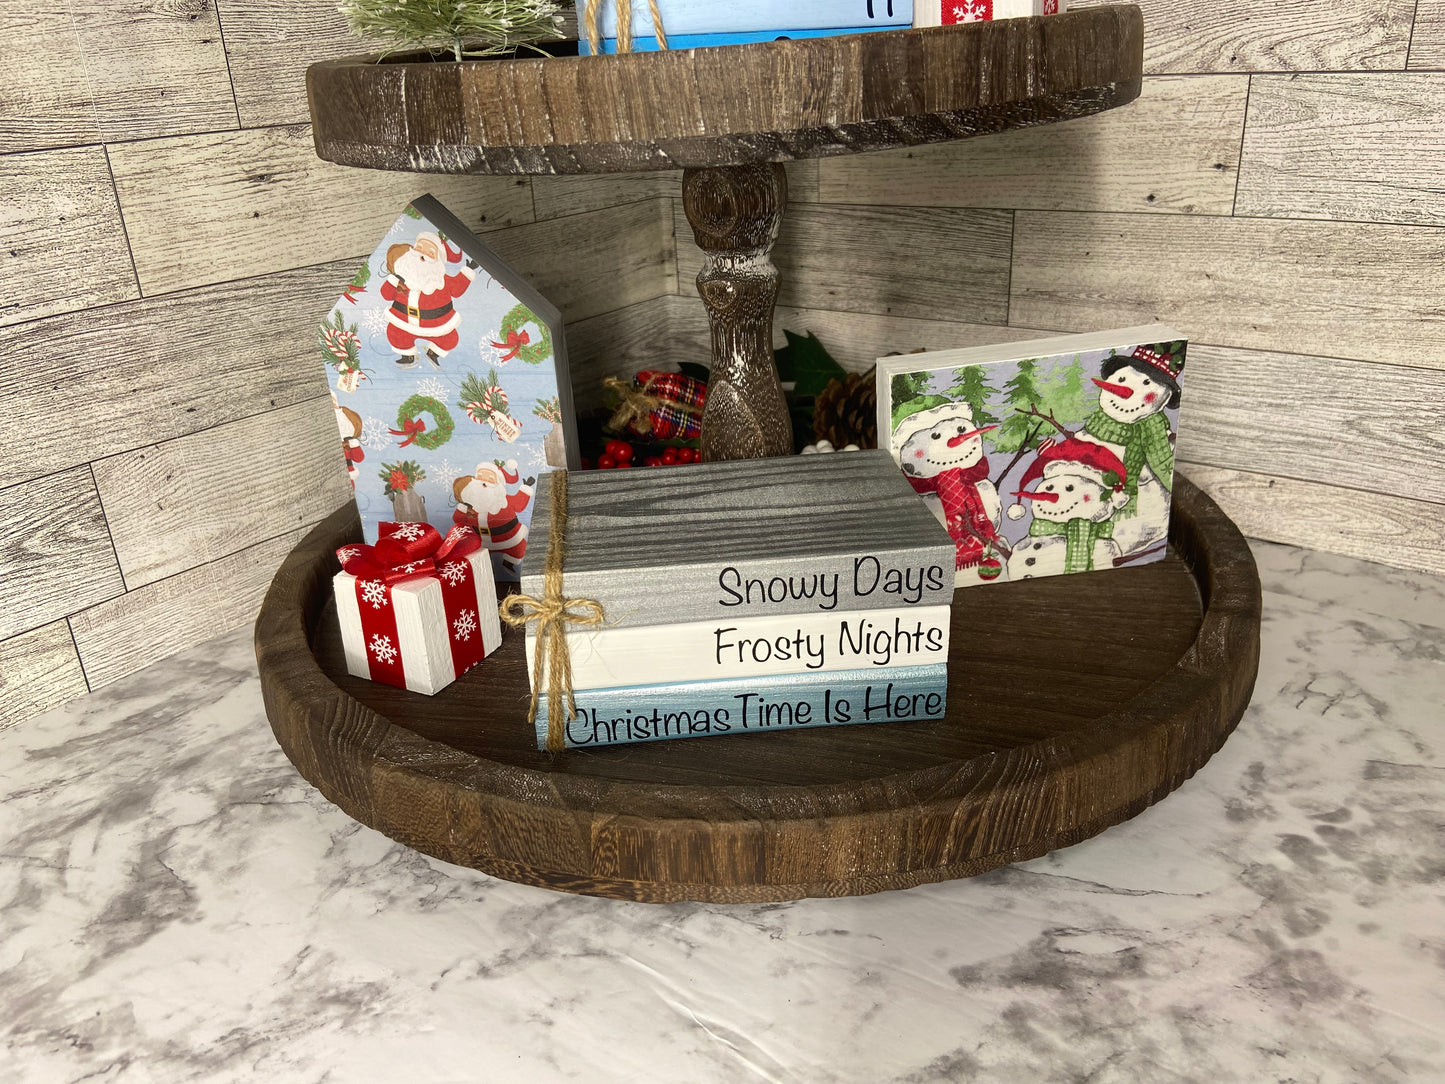 Snowy Days Frosty Nights Christmas Time Is Here - Large Christmas Tiered Tray Book